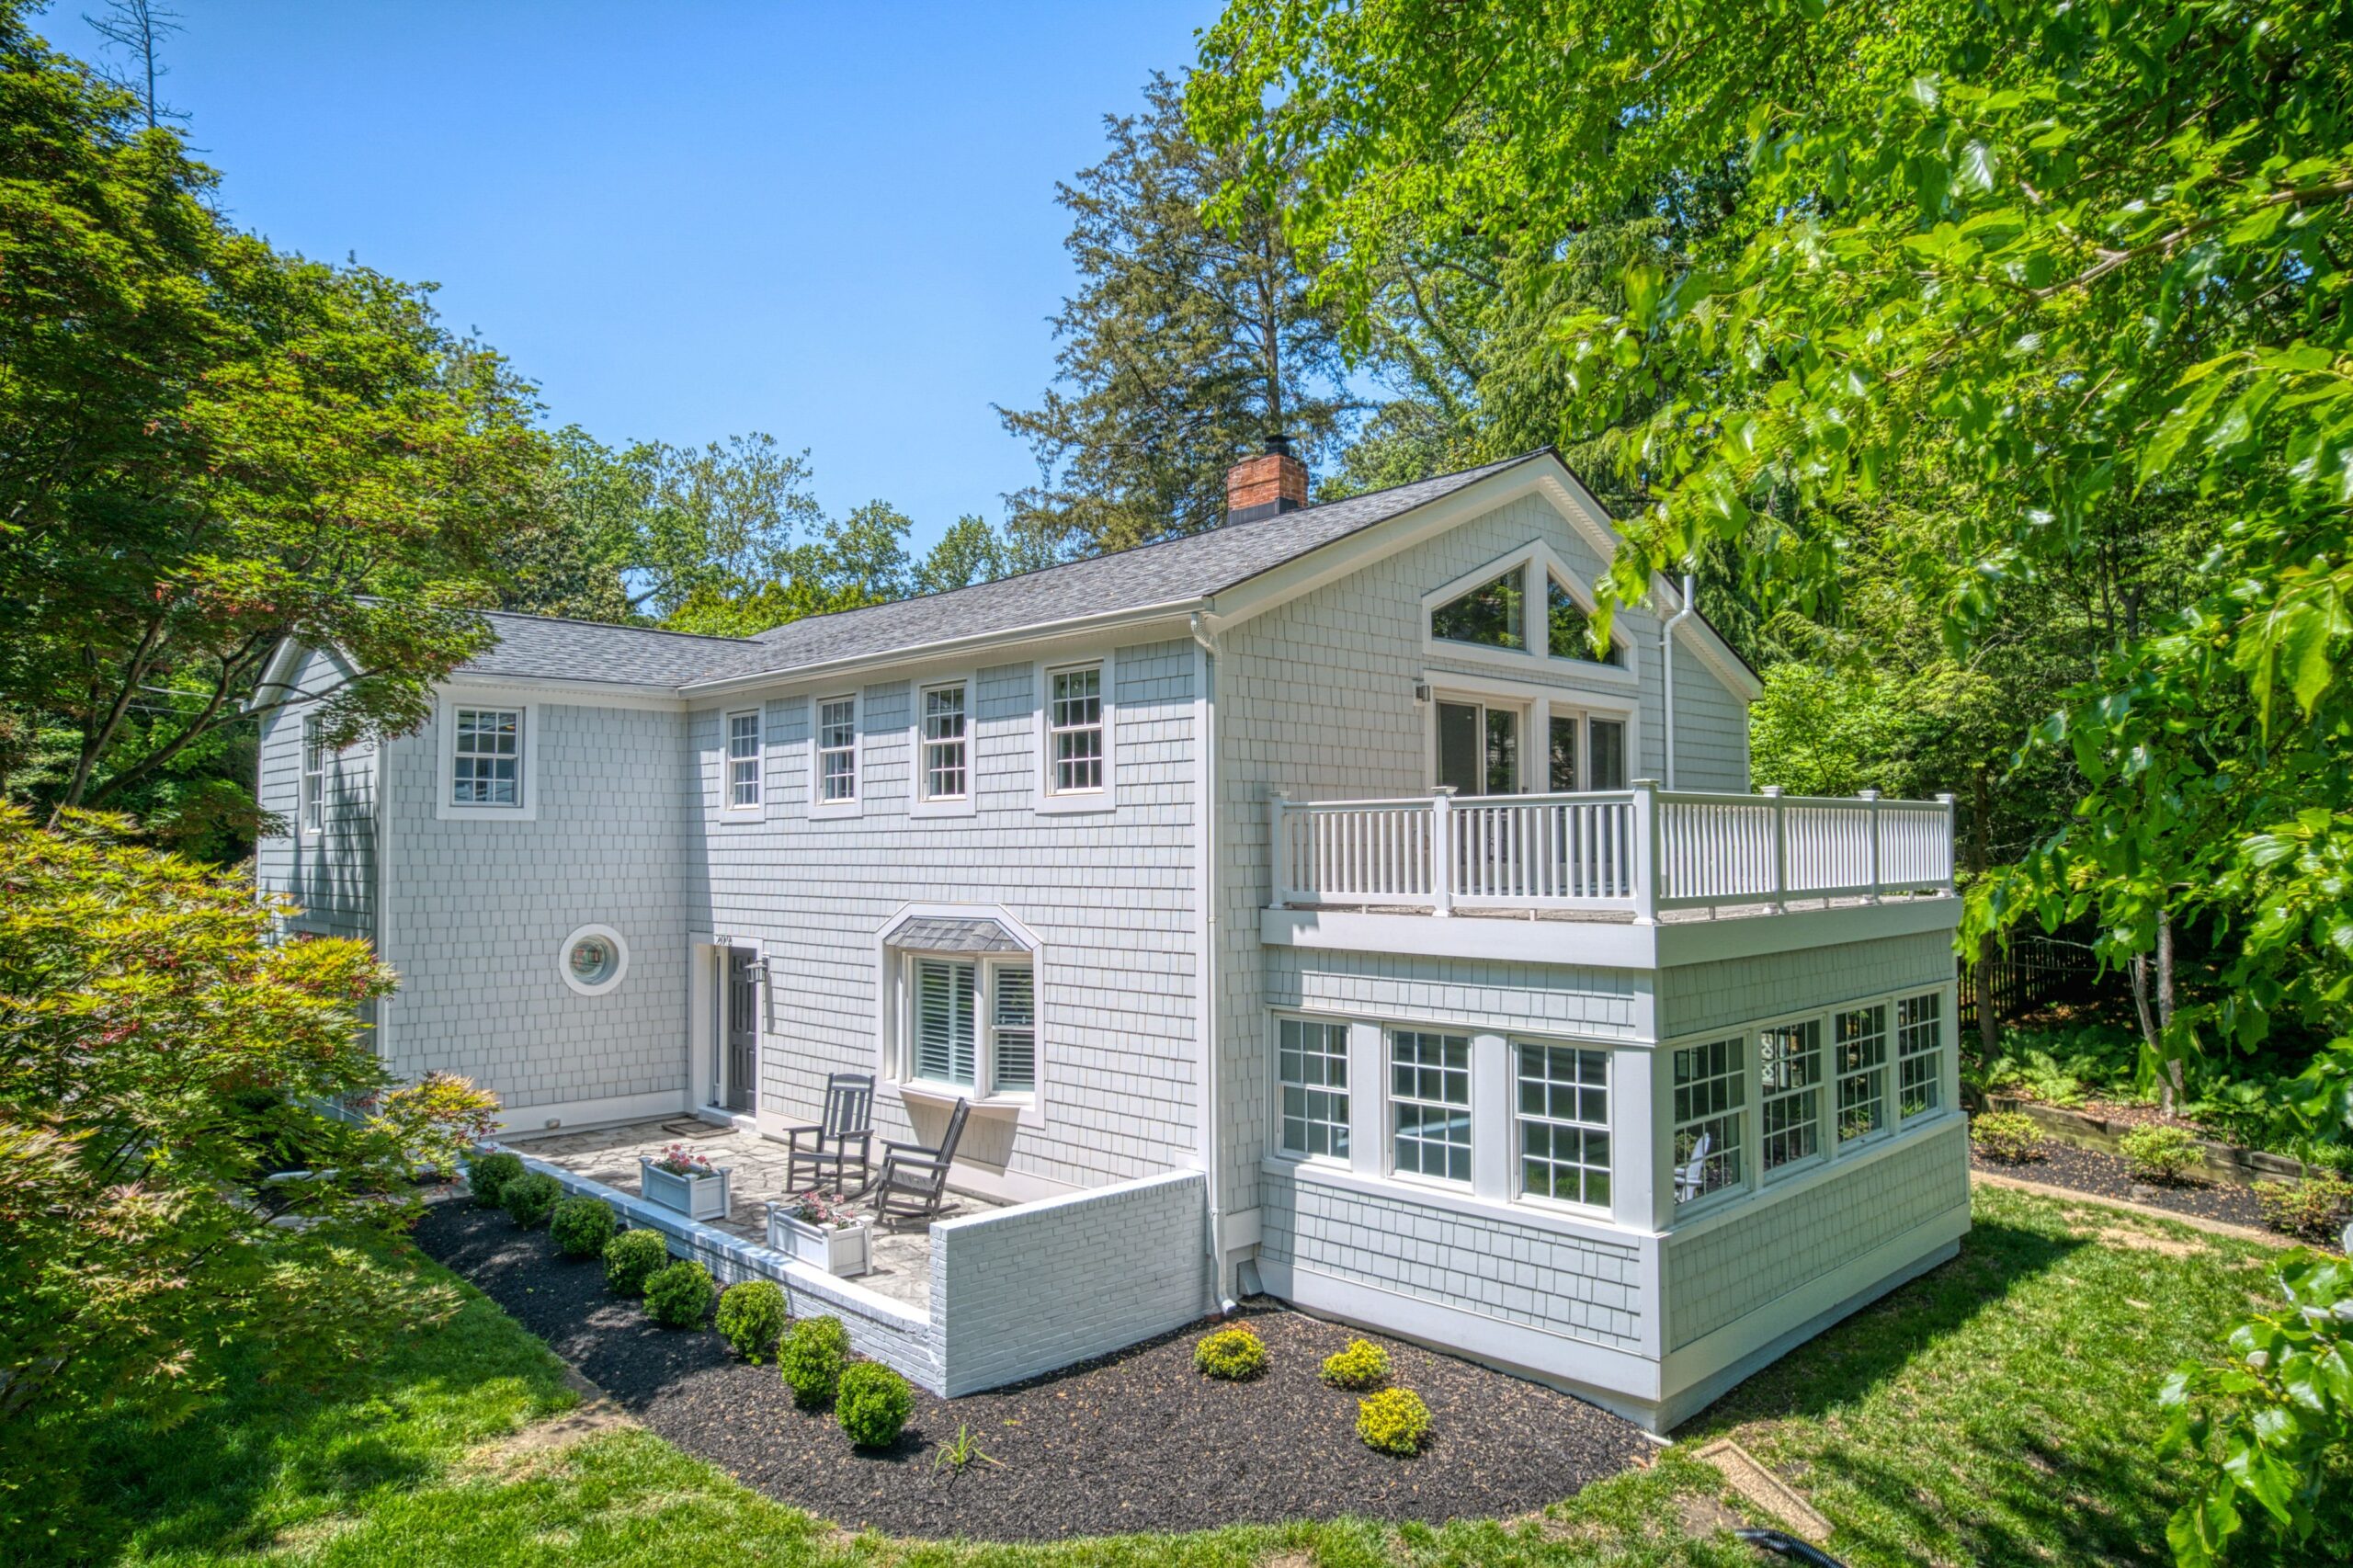 Professional aerial exterior photo of 209 Norwood Road, Annapolis, MD - showing the front corner of the home with main level patio and sunroom visible surrounded by trees